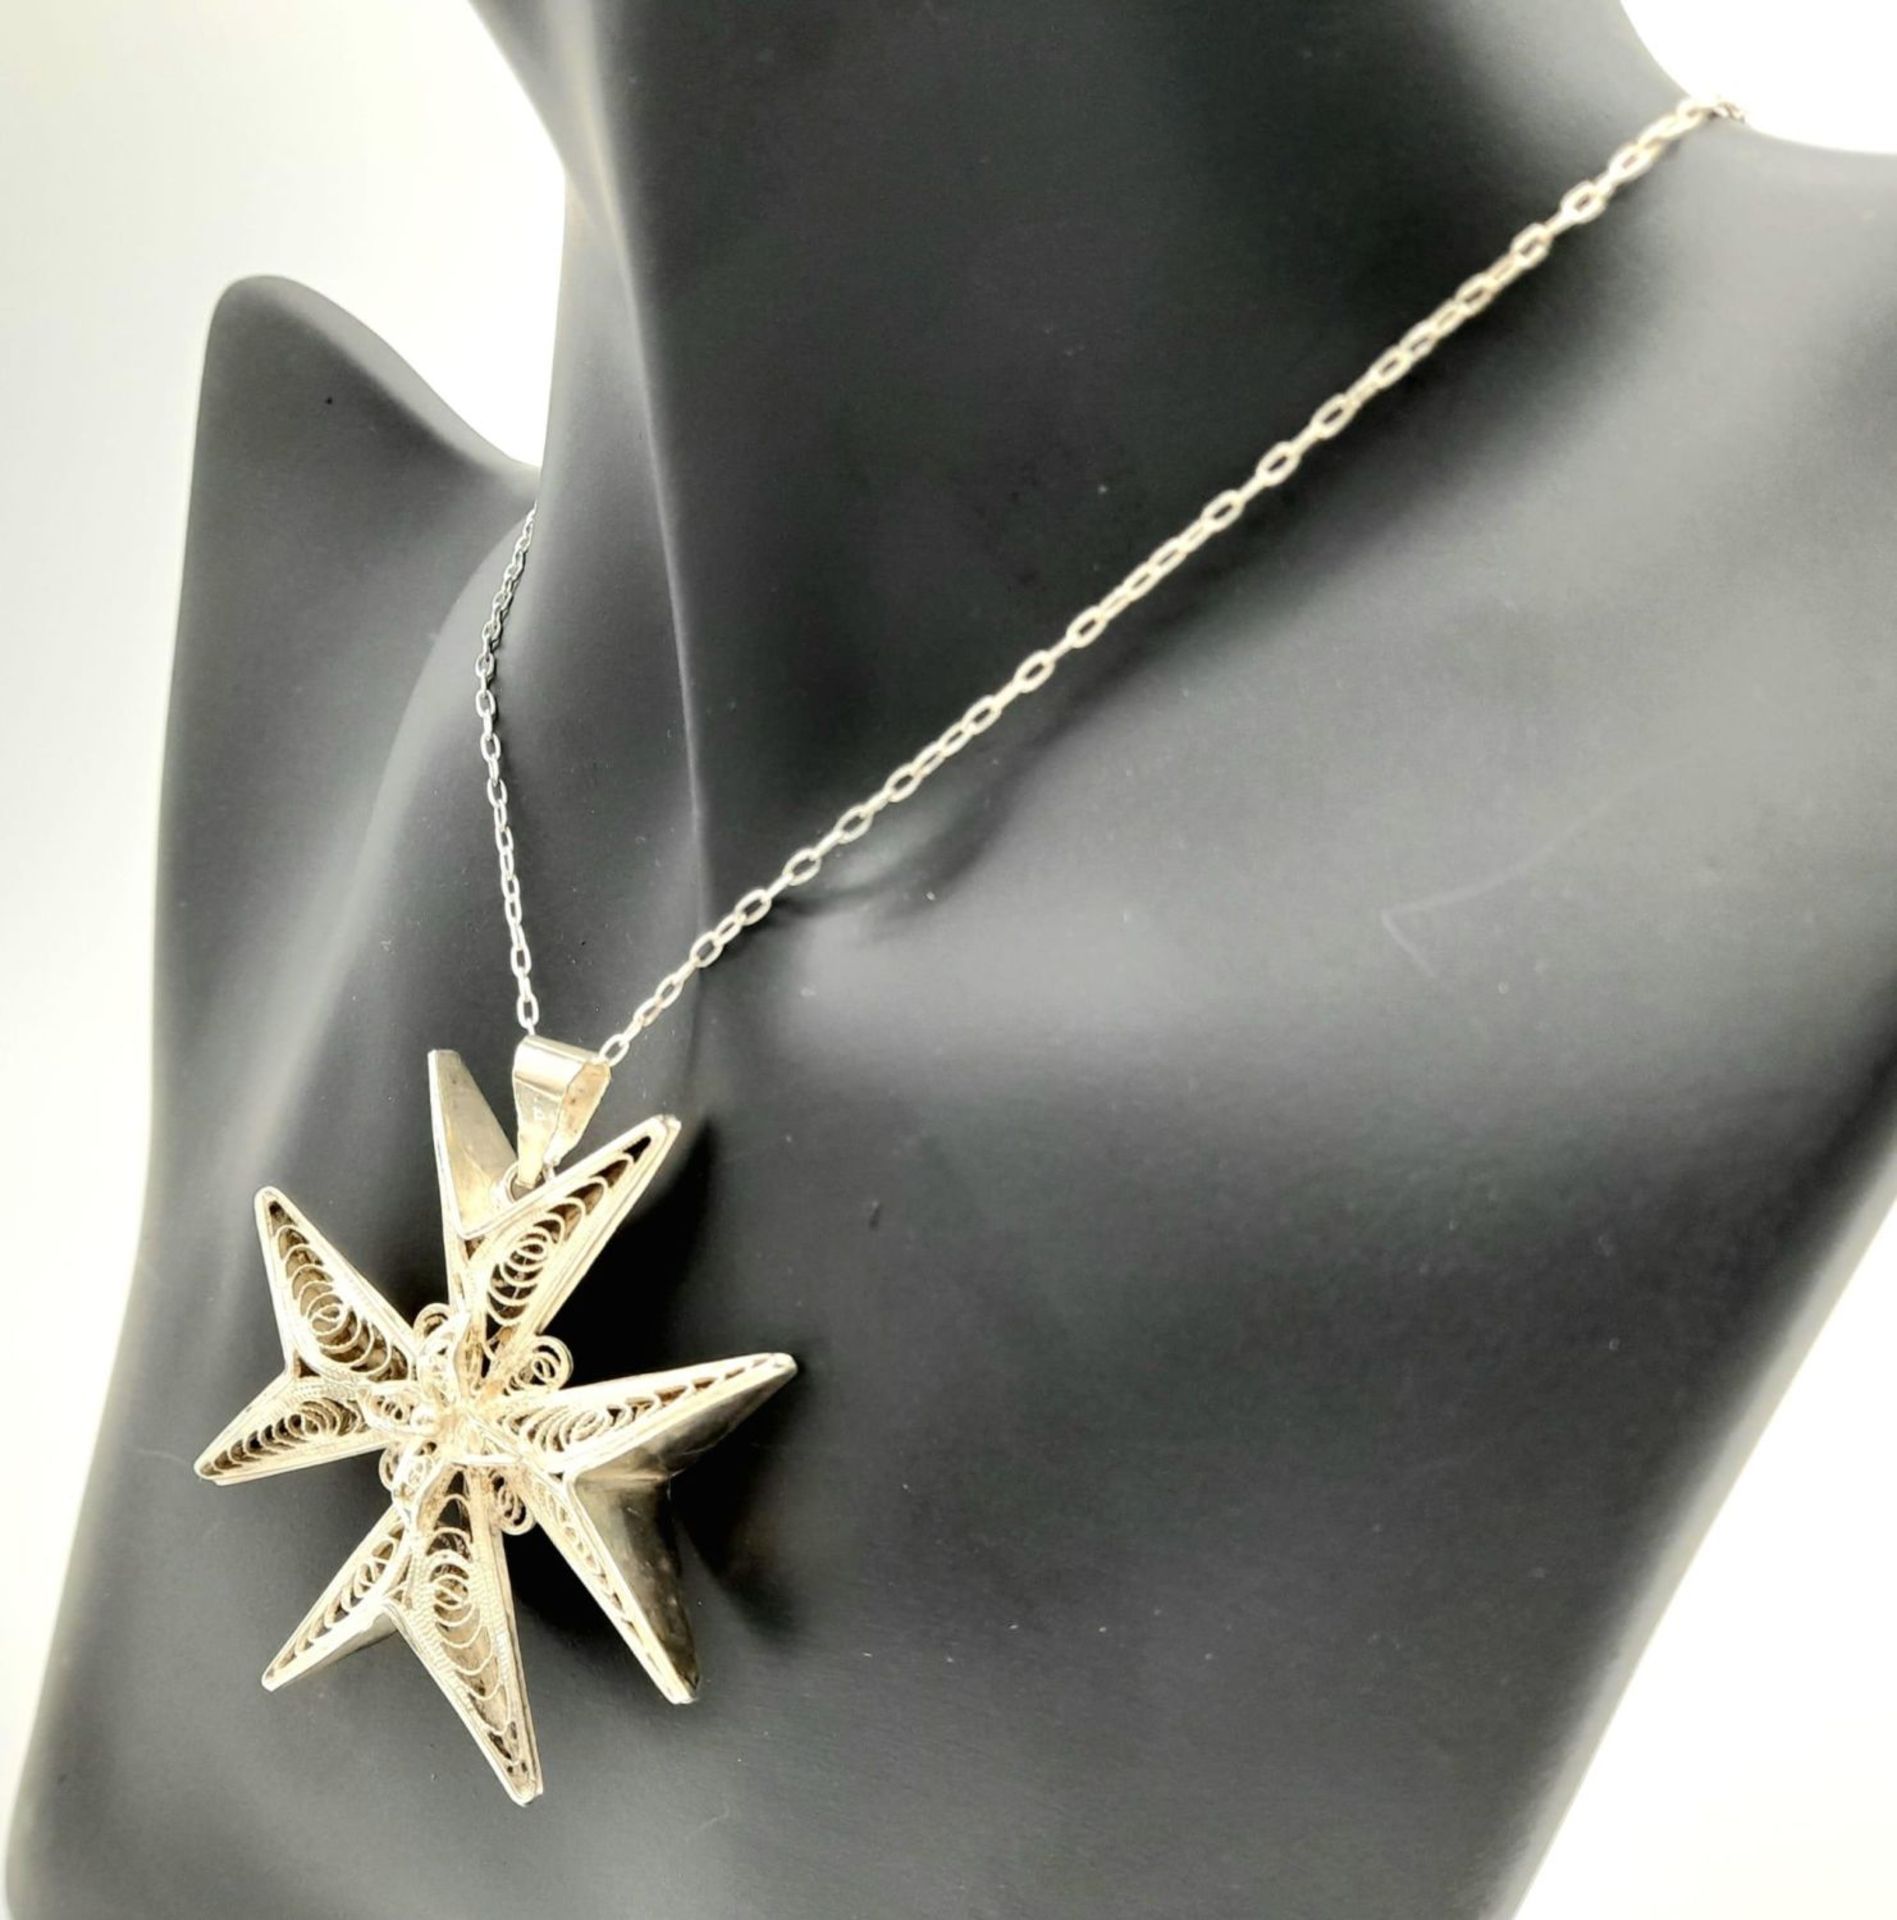 A Vintage 917 Silver, Filigree Maltese Cross Pendant Necklace. Pendant Measures 4.5cm Wide and is on - Image 7 of 16